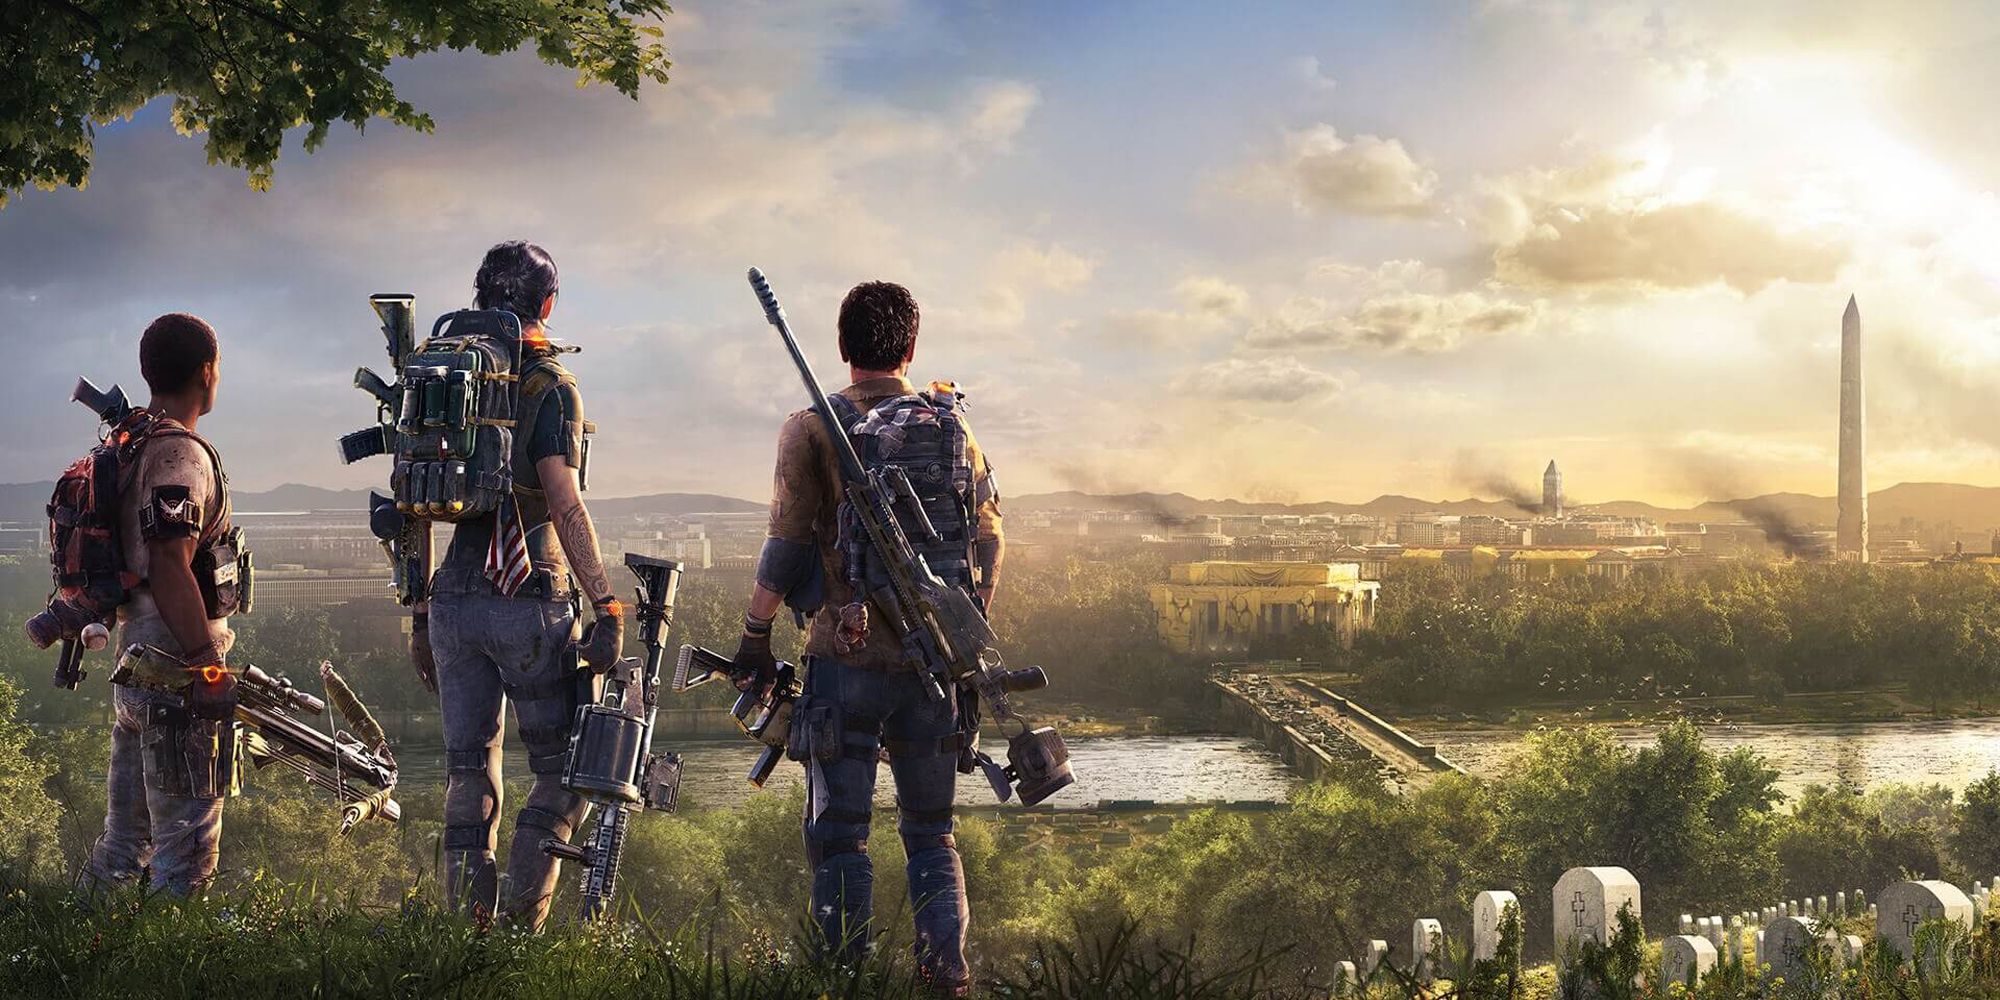 Sleeper agents from the Division look out upon a destroyed Washington D.C. skyline